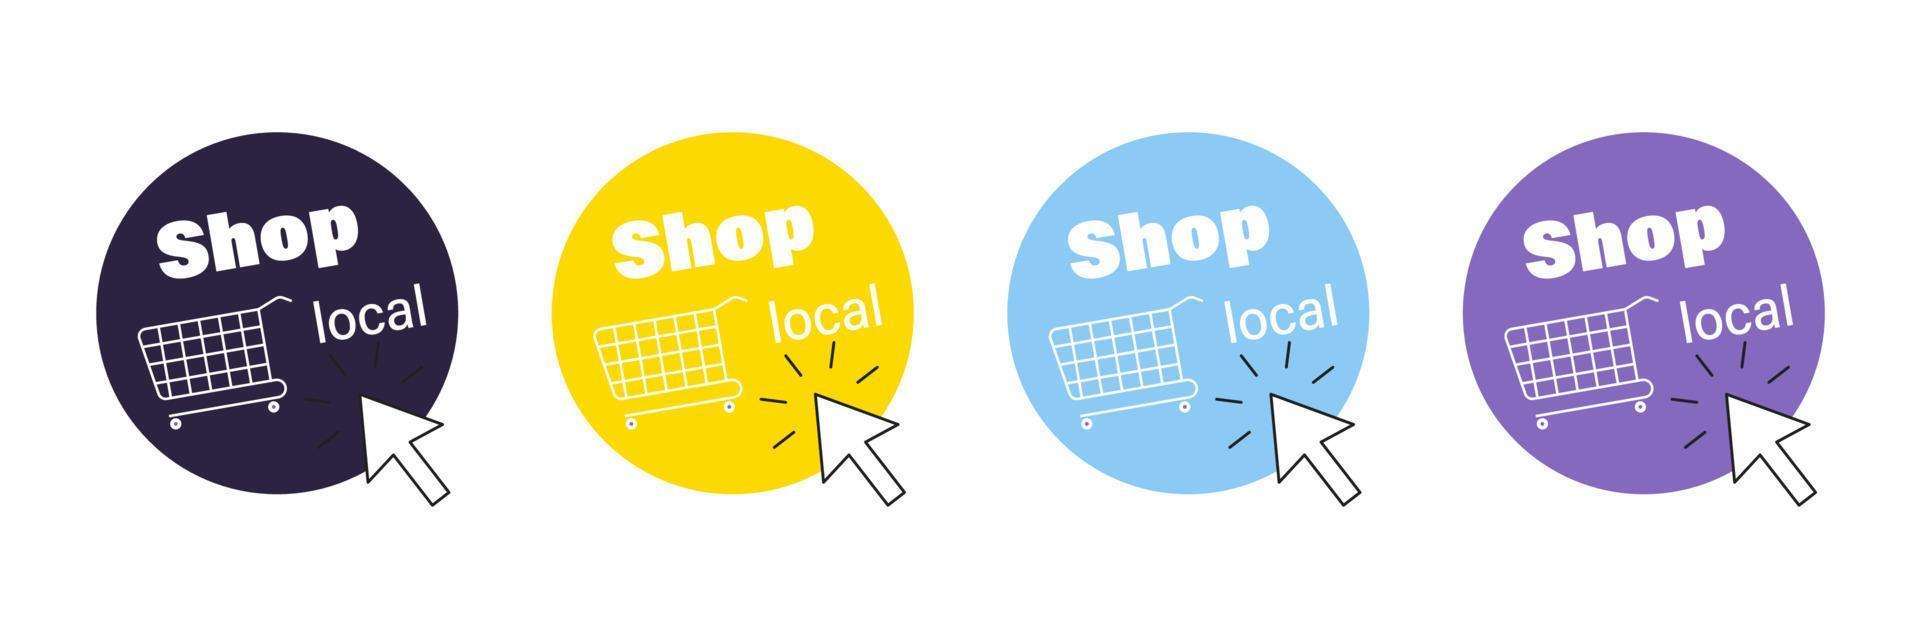 Shop local. Support small business vector